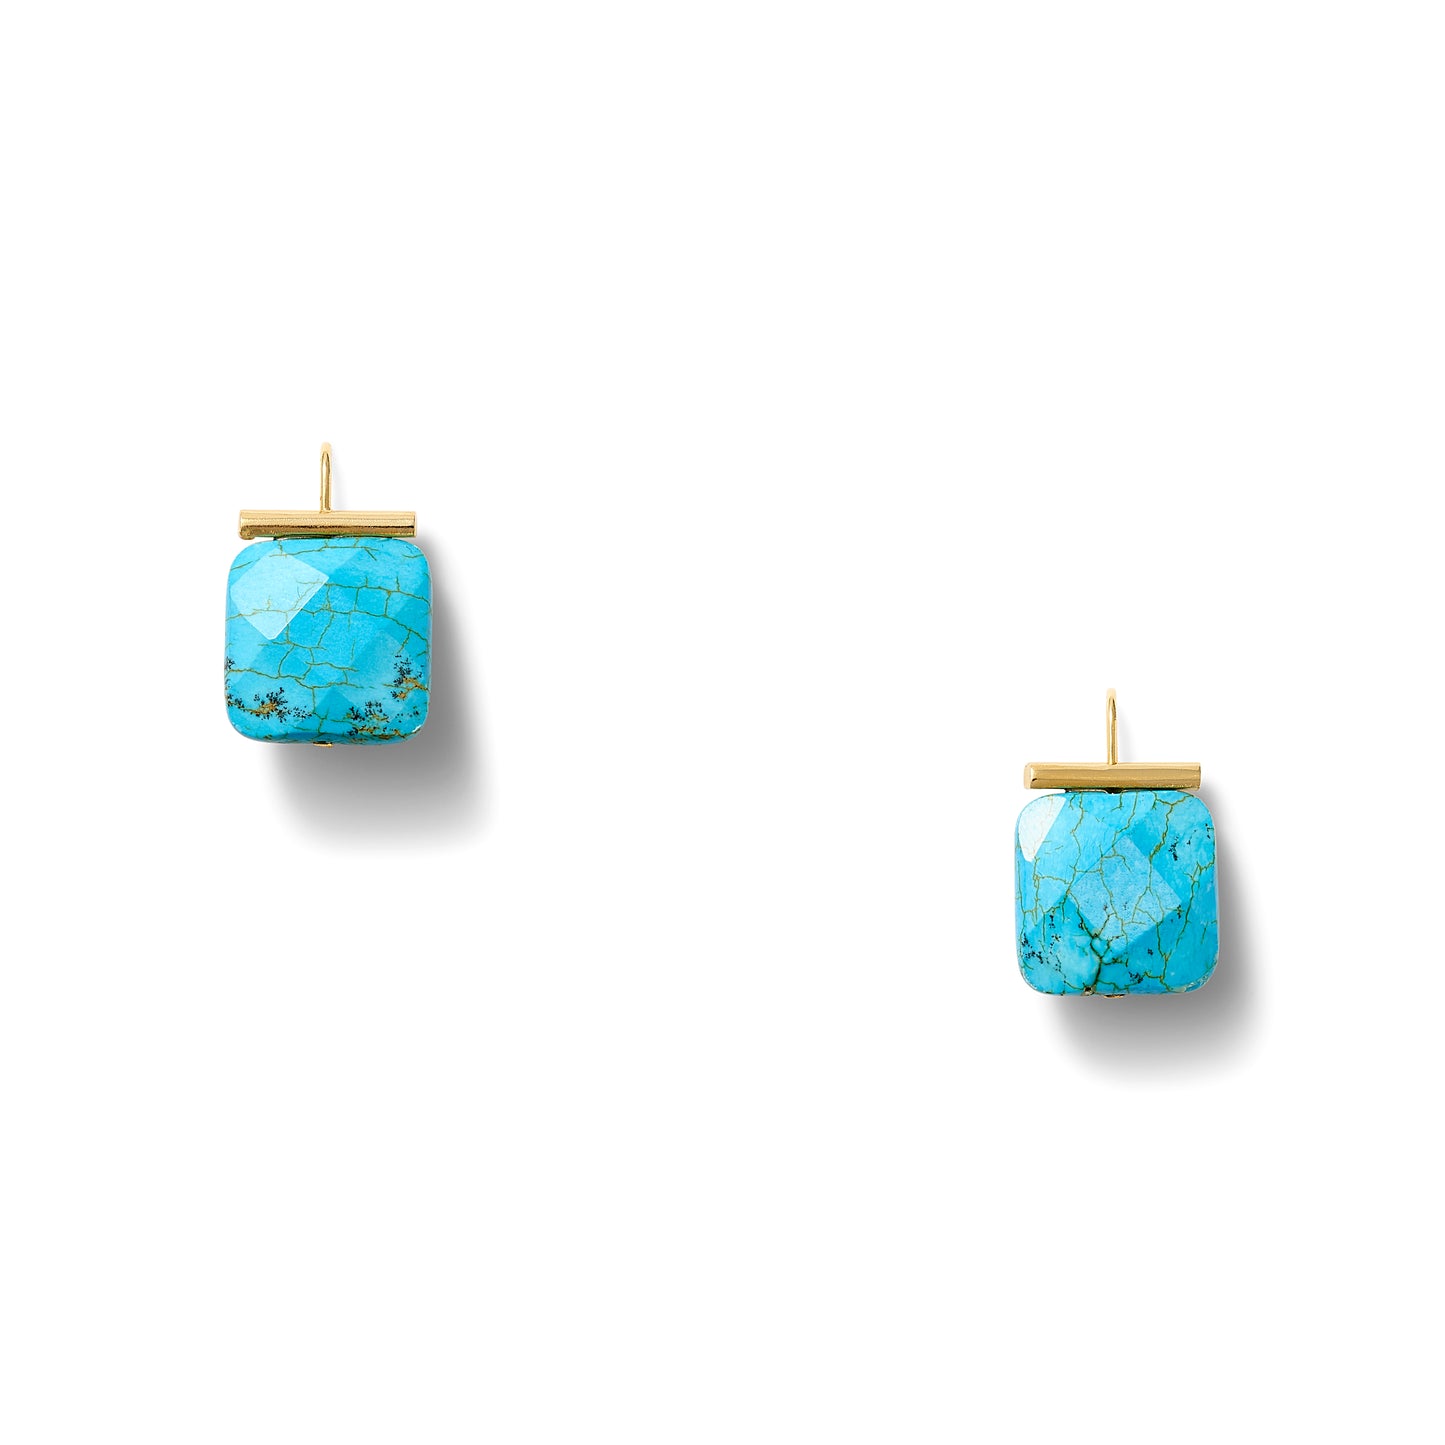 Turquoise and Gold earrings